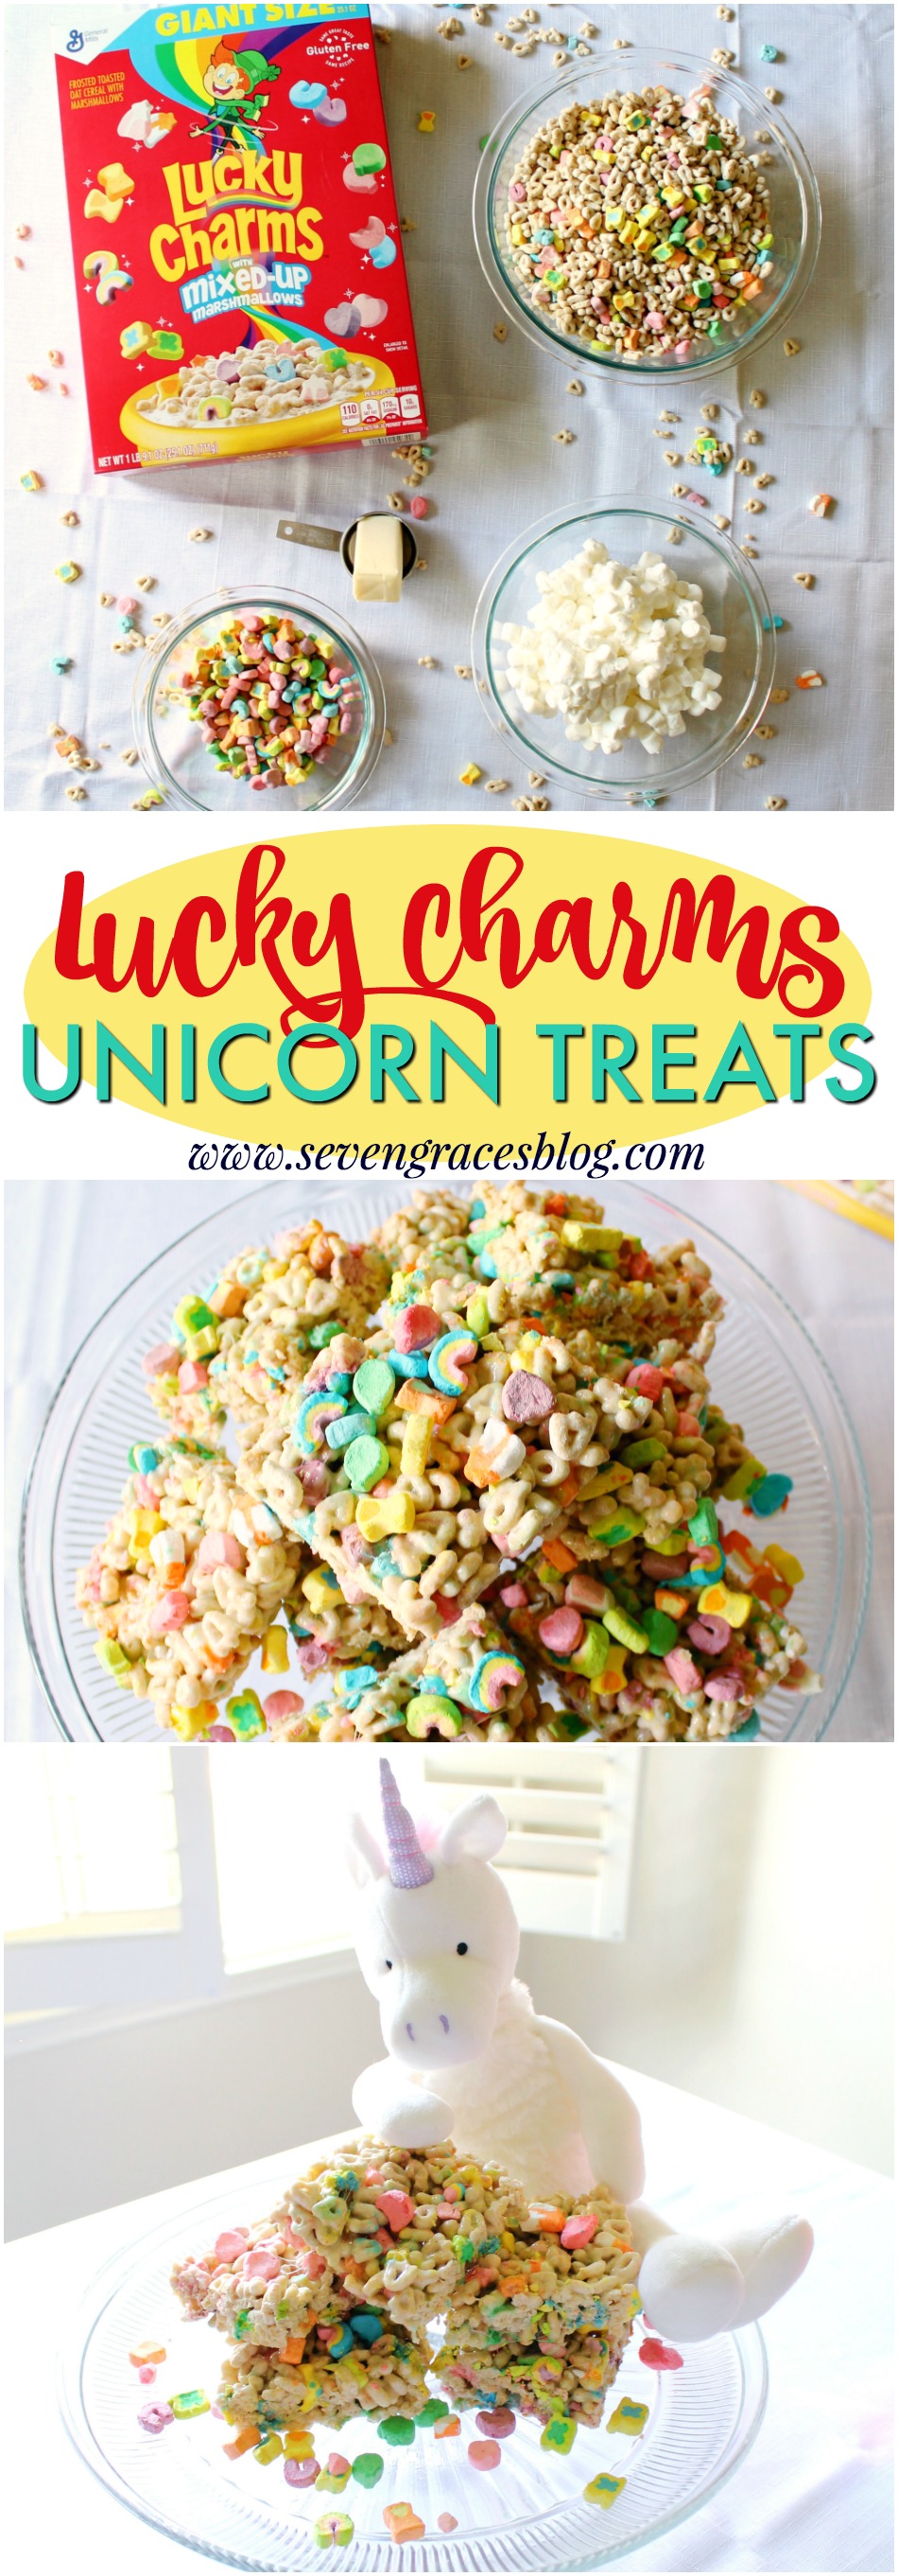 Lucky Charms Unicorn Treats. The cutest and yummiest treats to make with your child. The perfect rainy day activity! #ad #diadelniño #cerealconcariño